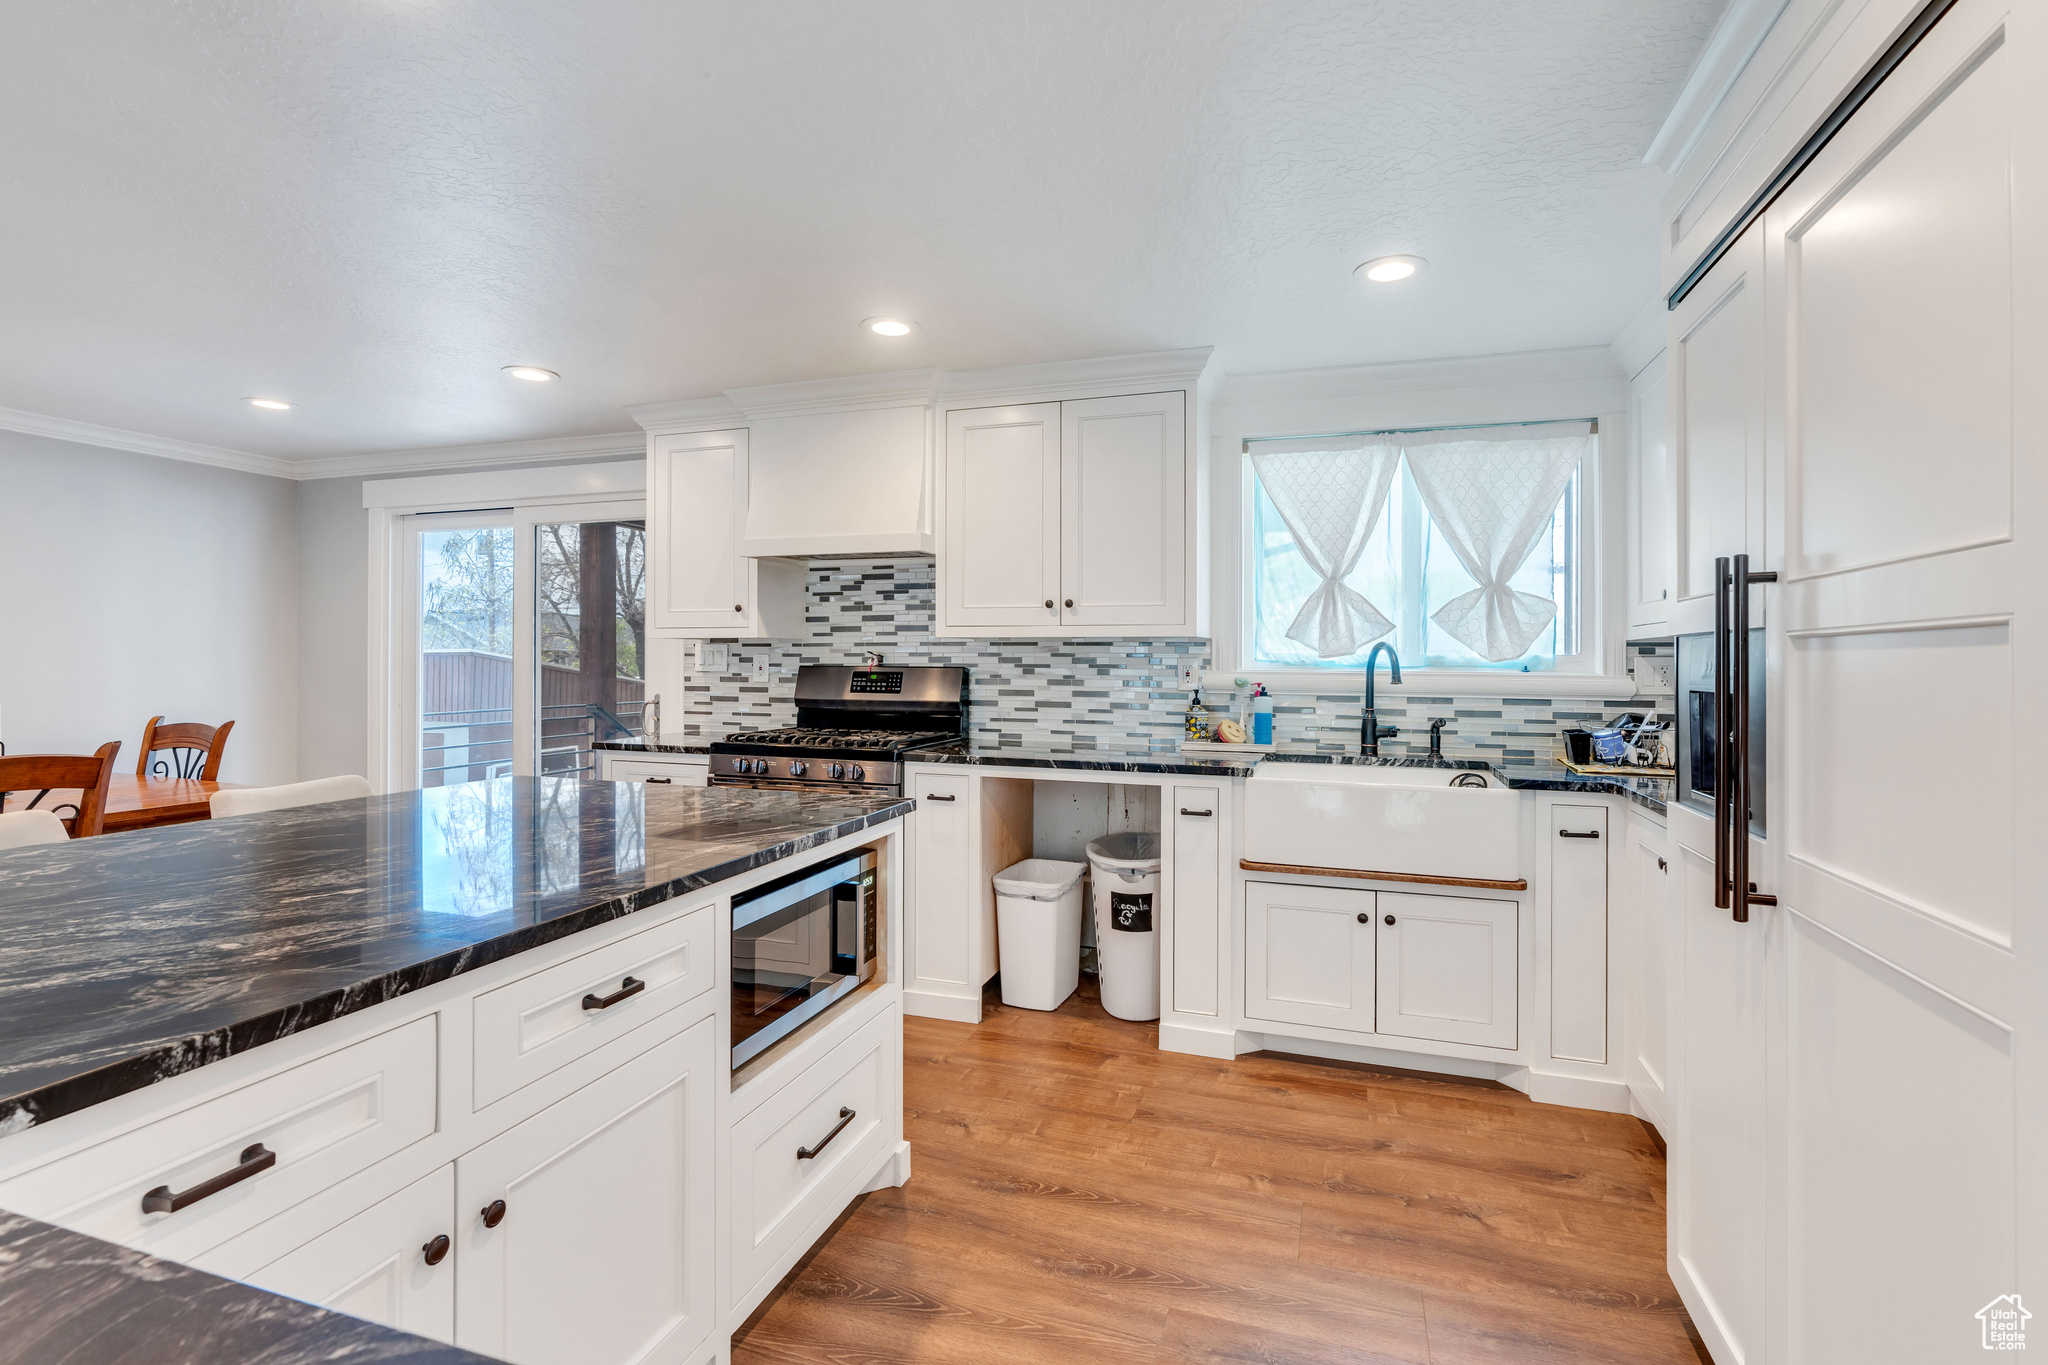 Kitchen featuring appliances with stainless steel finishes, light hardwood / wood-style floors, white cabinetry, sink, and ornamental molding